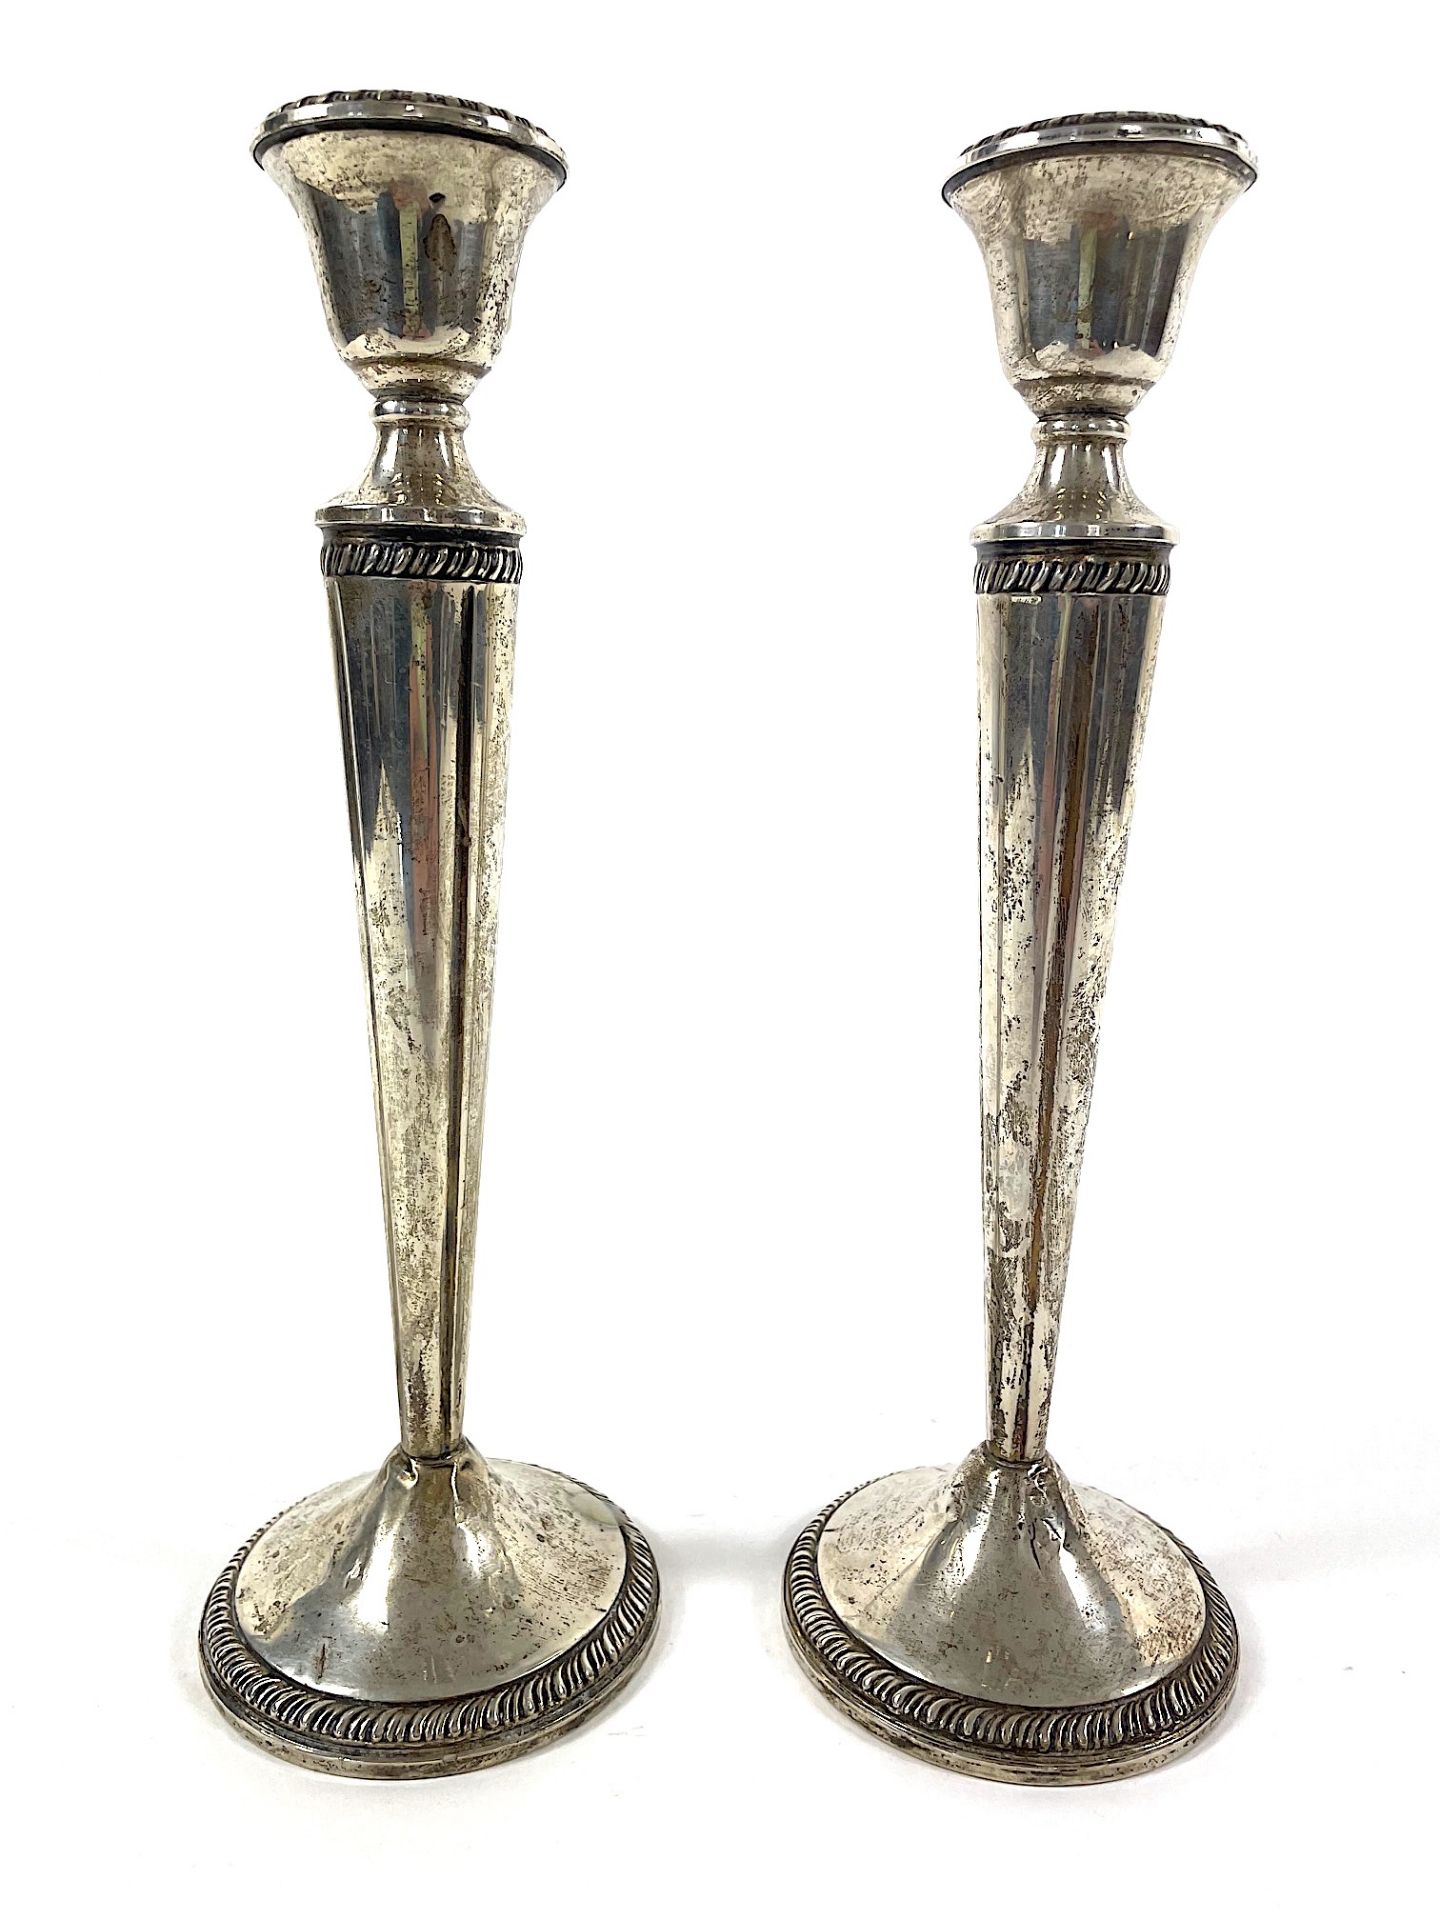 2 candlesticks in 925 silver - Image 2 of 11